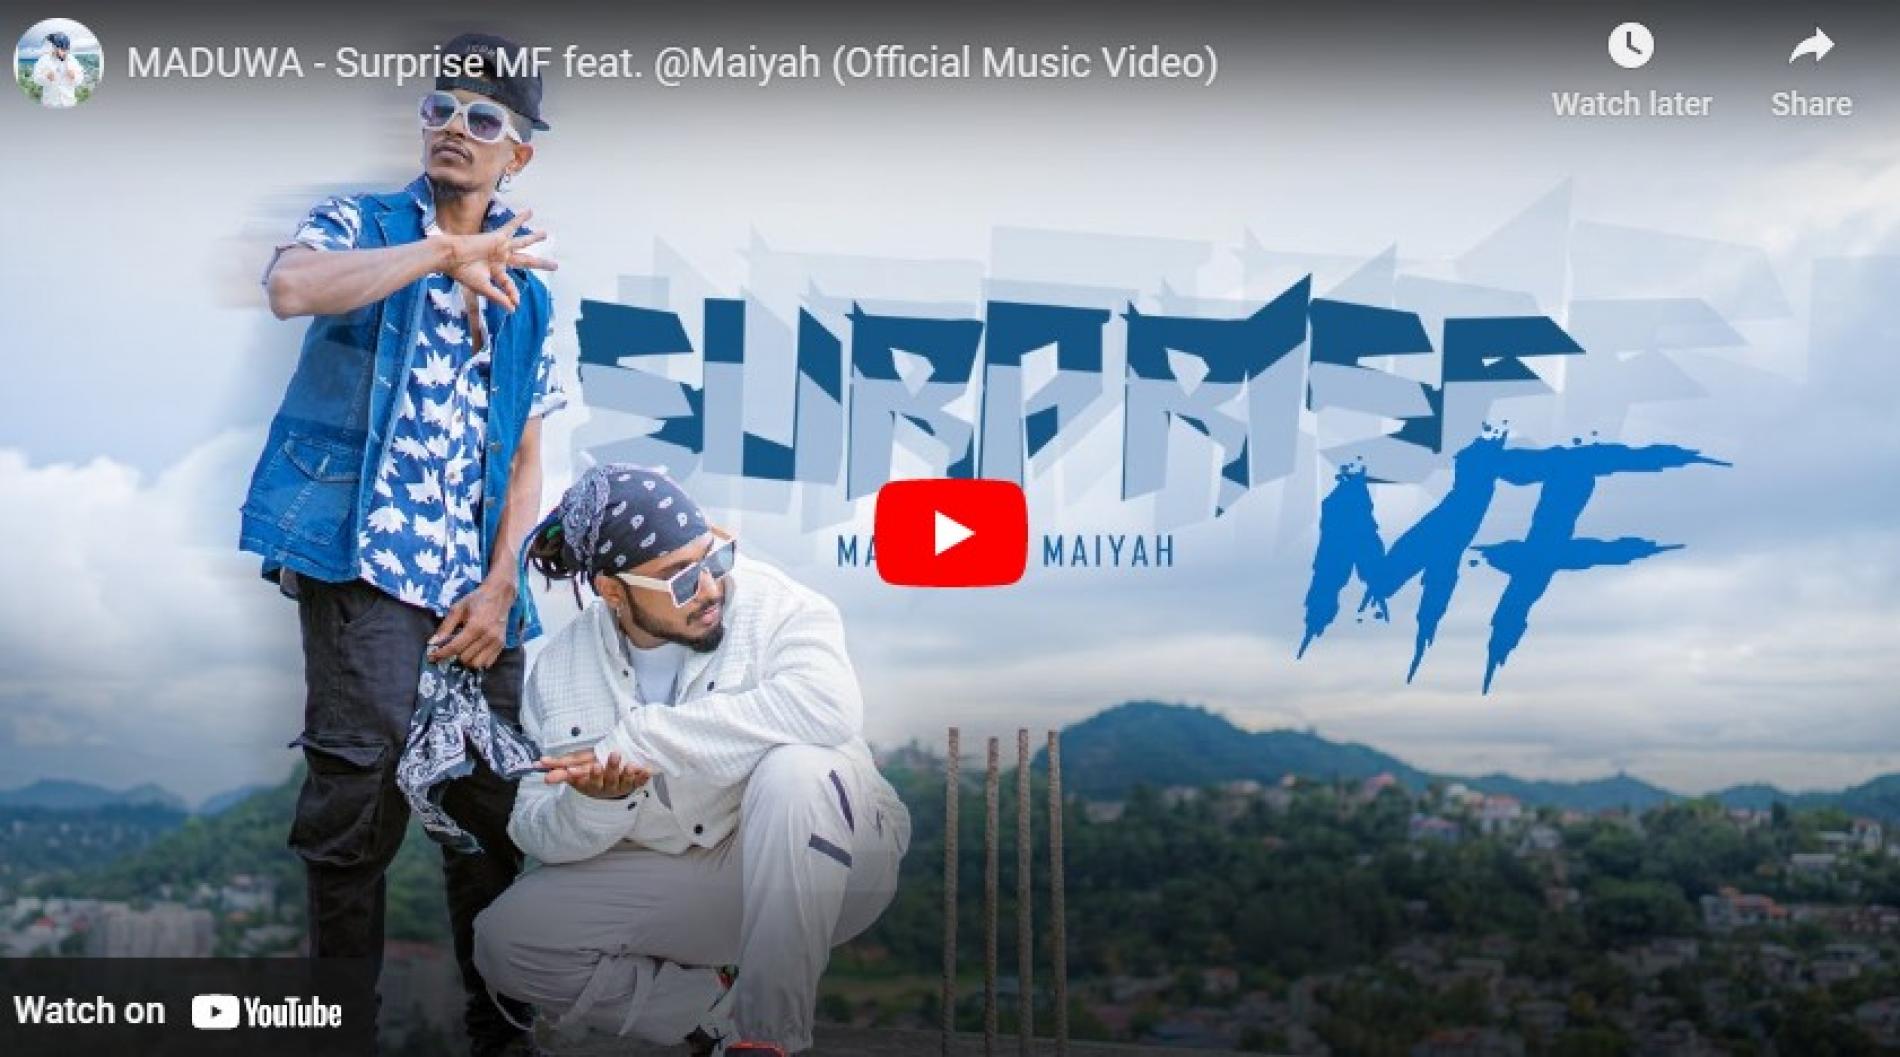 New Music : MADUWA – Surprise MF feat. @Maiyah (Official Music Video)